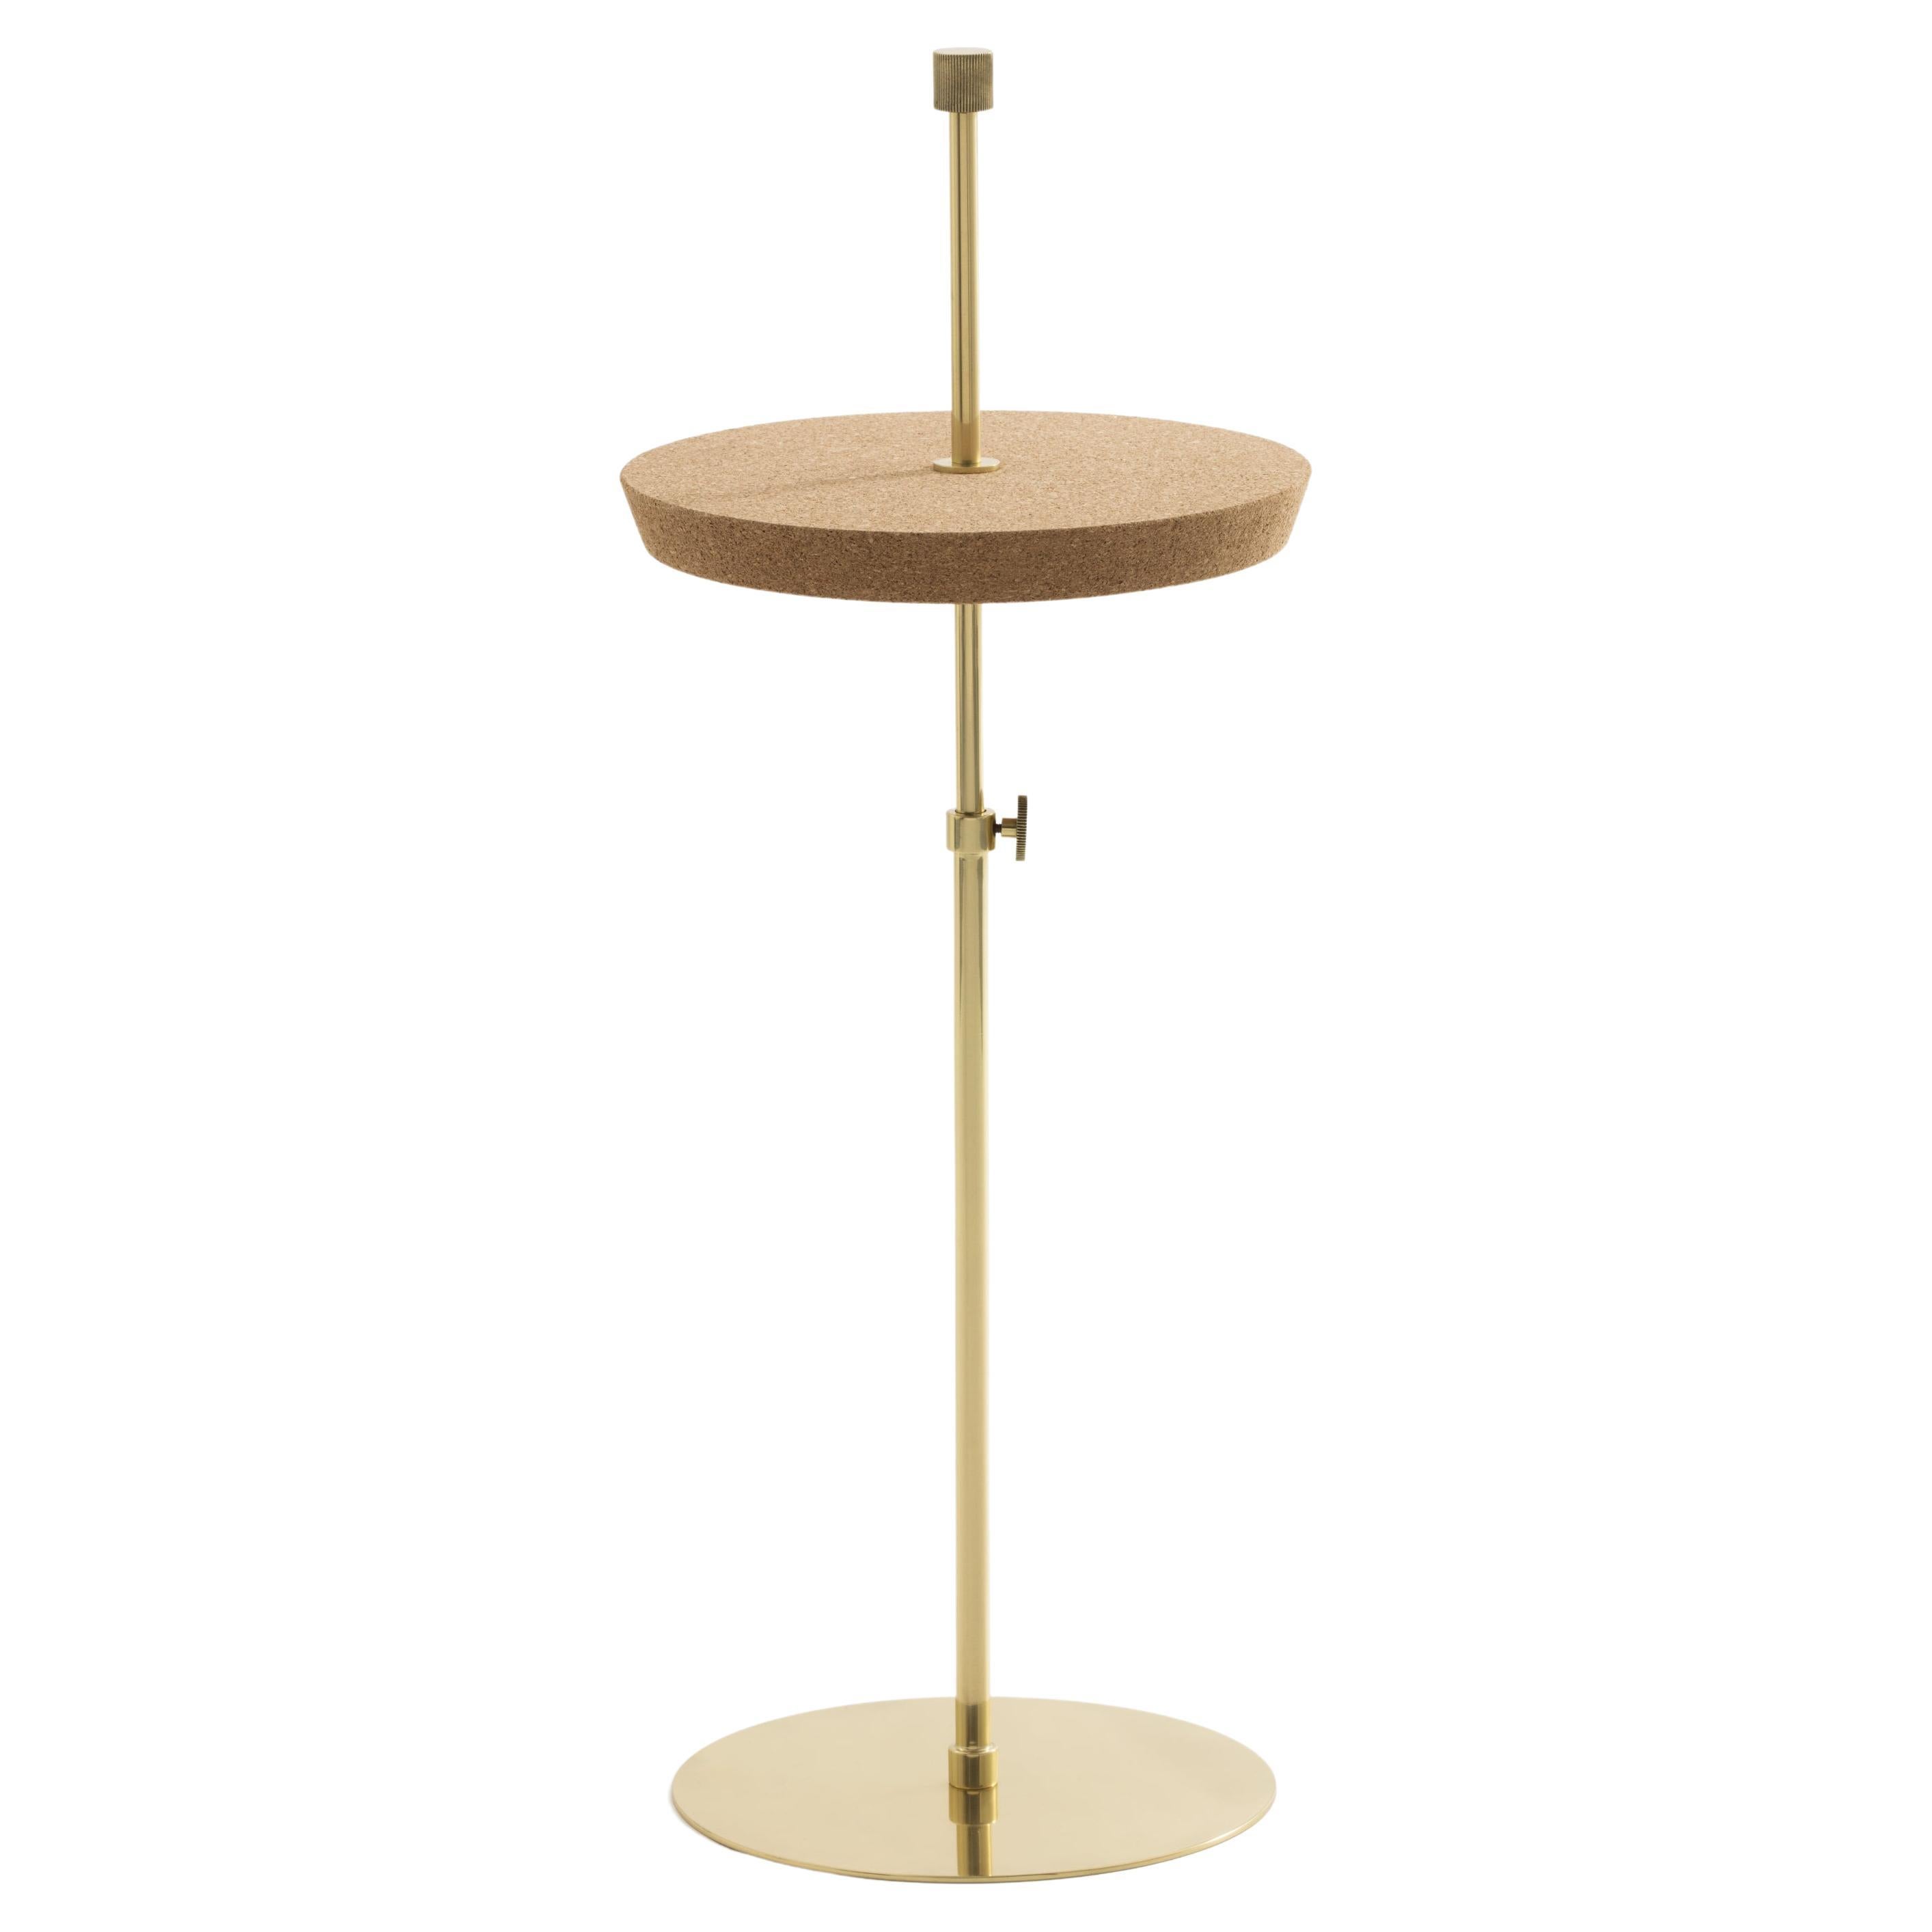 The disco side table was developed to be easy, both in transport and in height adjustment, so it adapts to any indoor environment.
The height of the top can be adjusted using the pin located next to the stem, its finishes, like the entire Disco